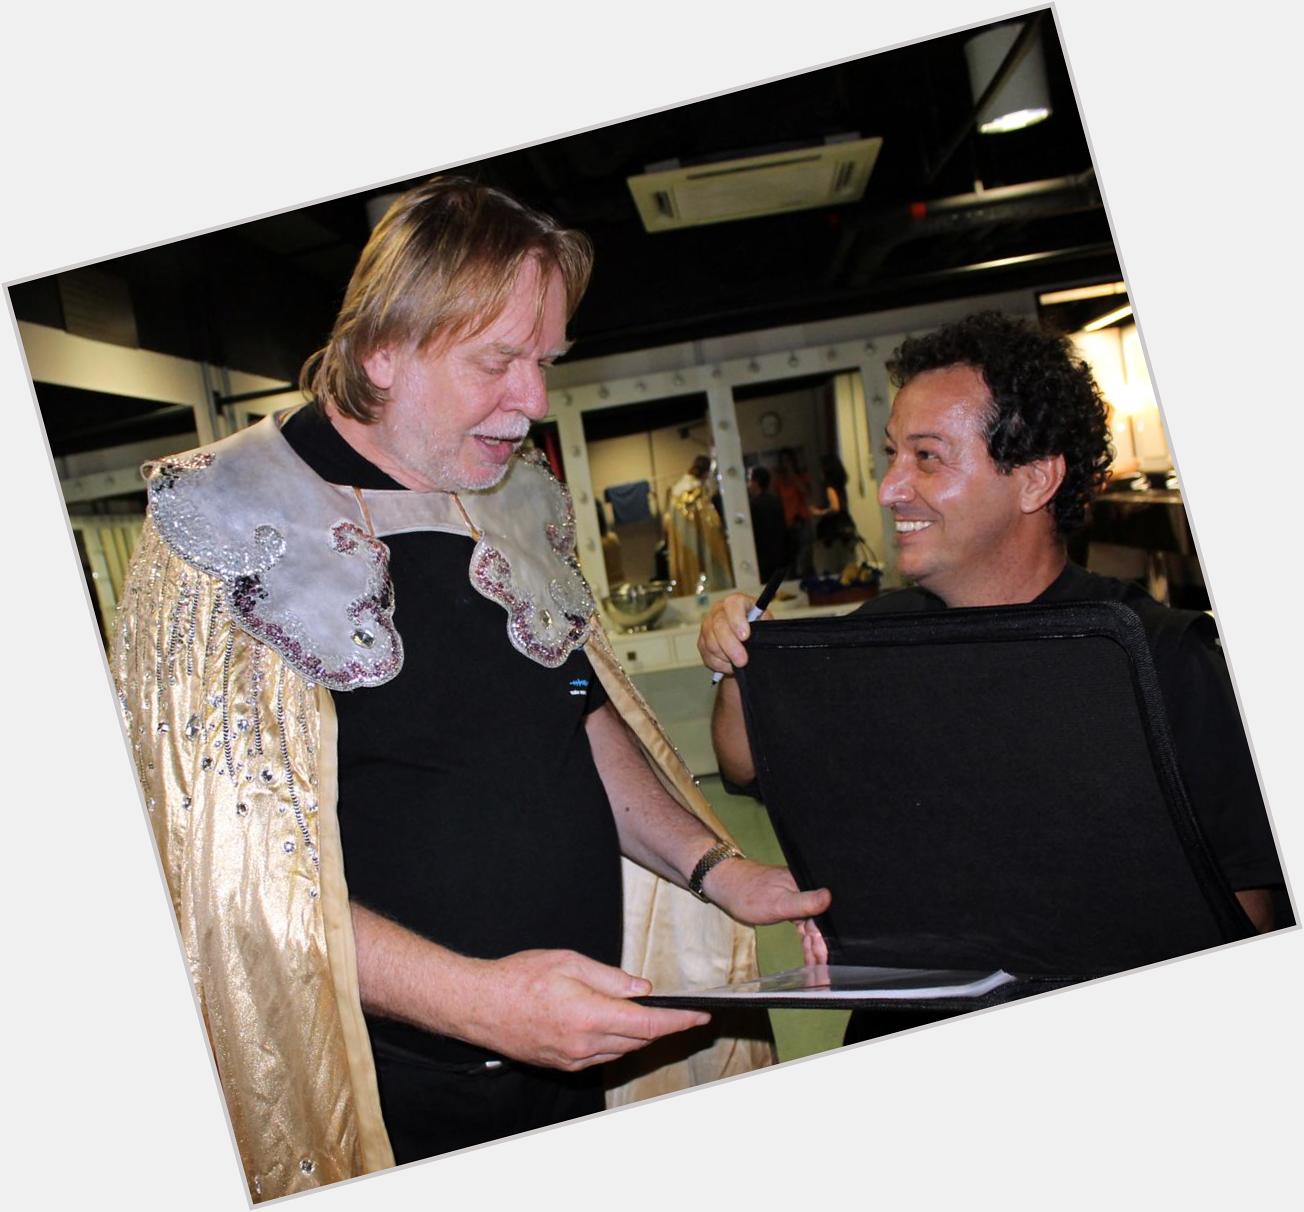 A very happy Birthday to Rick Wakeman! \"Maestro\", the best ever ... See you soon in Brazil. Almir 